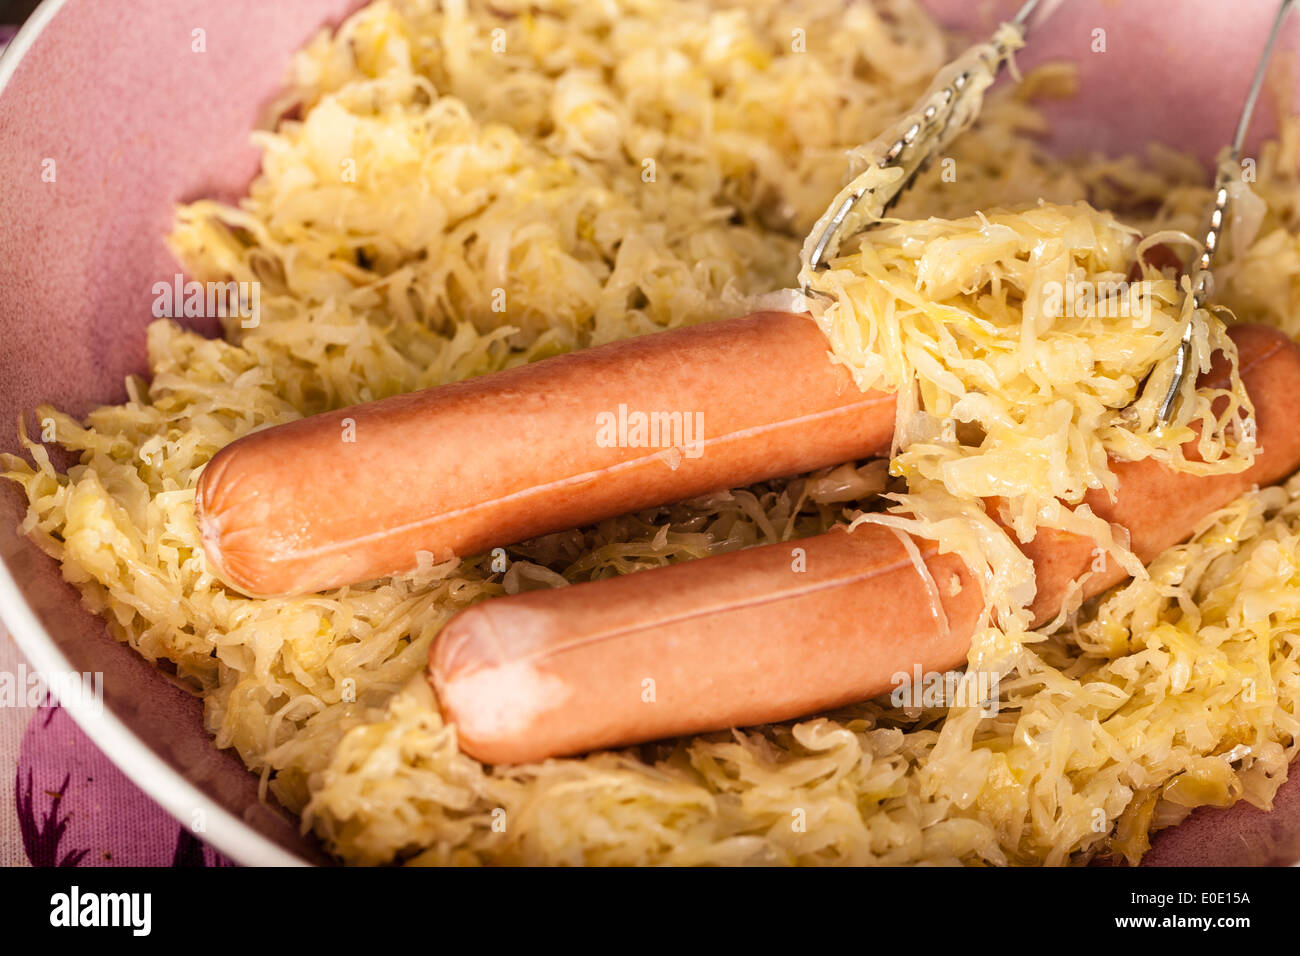 two wiener sausages in a bowl with sauerkraut Stock Photo